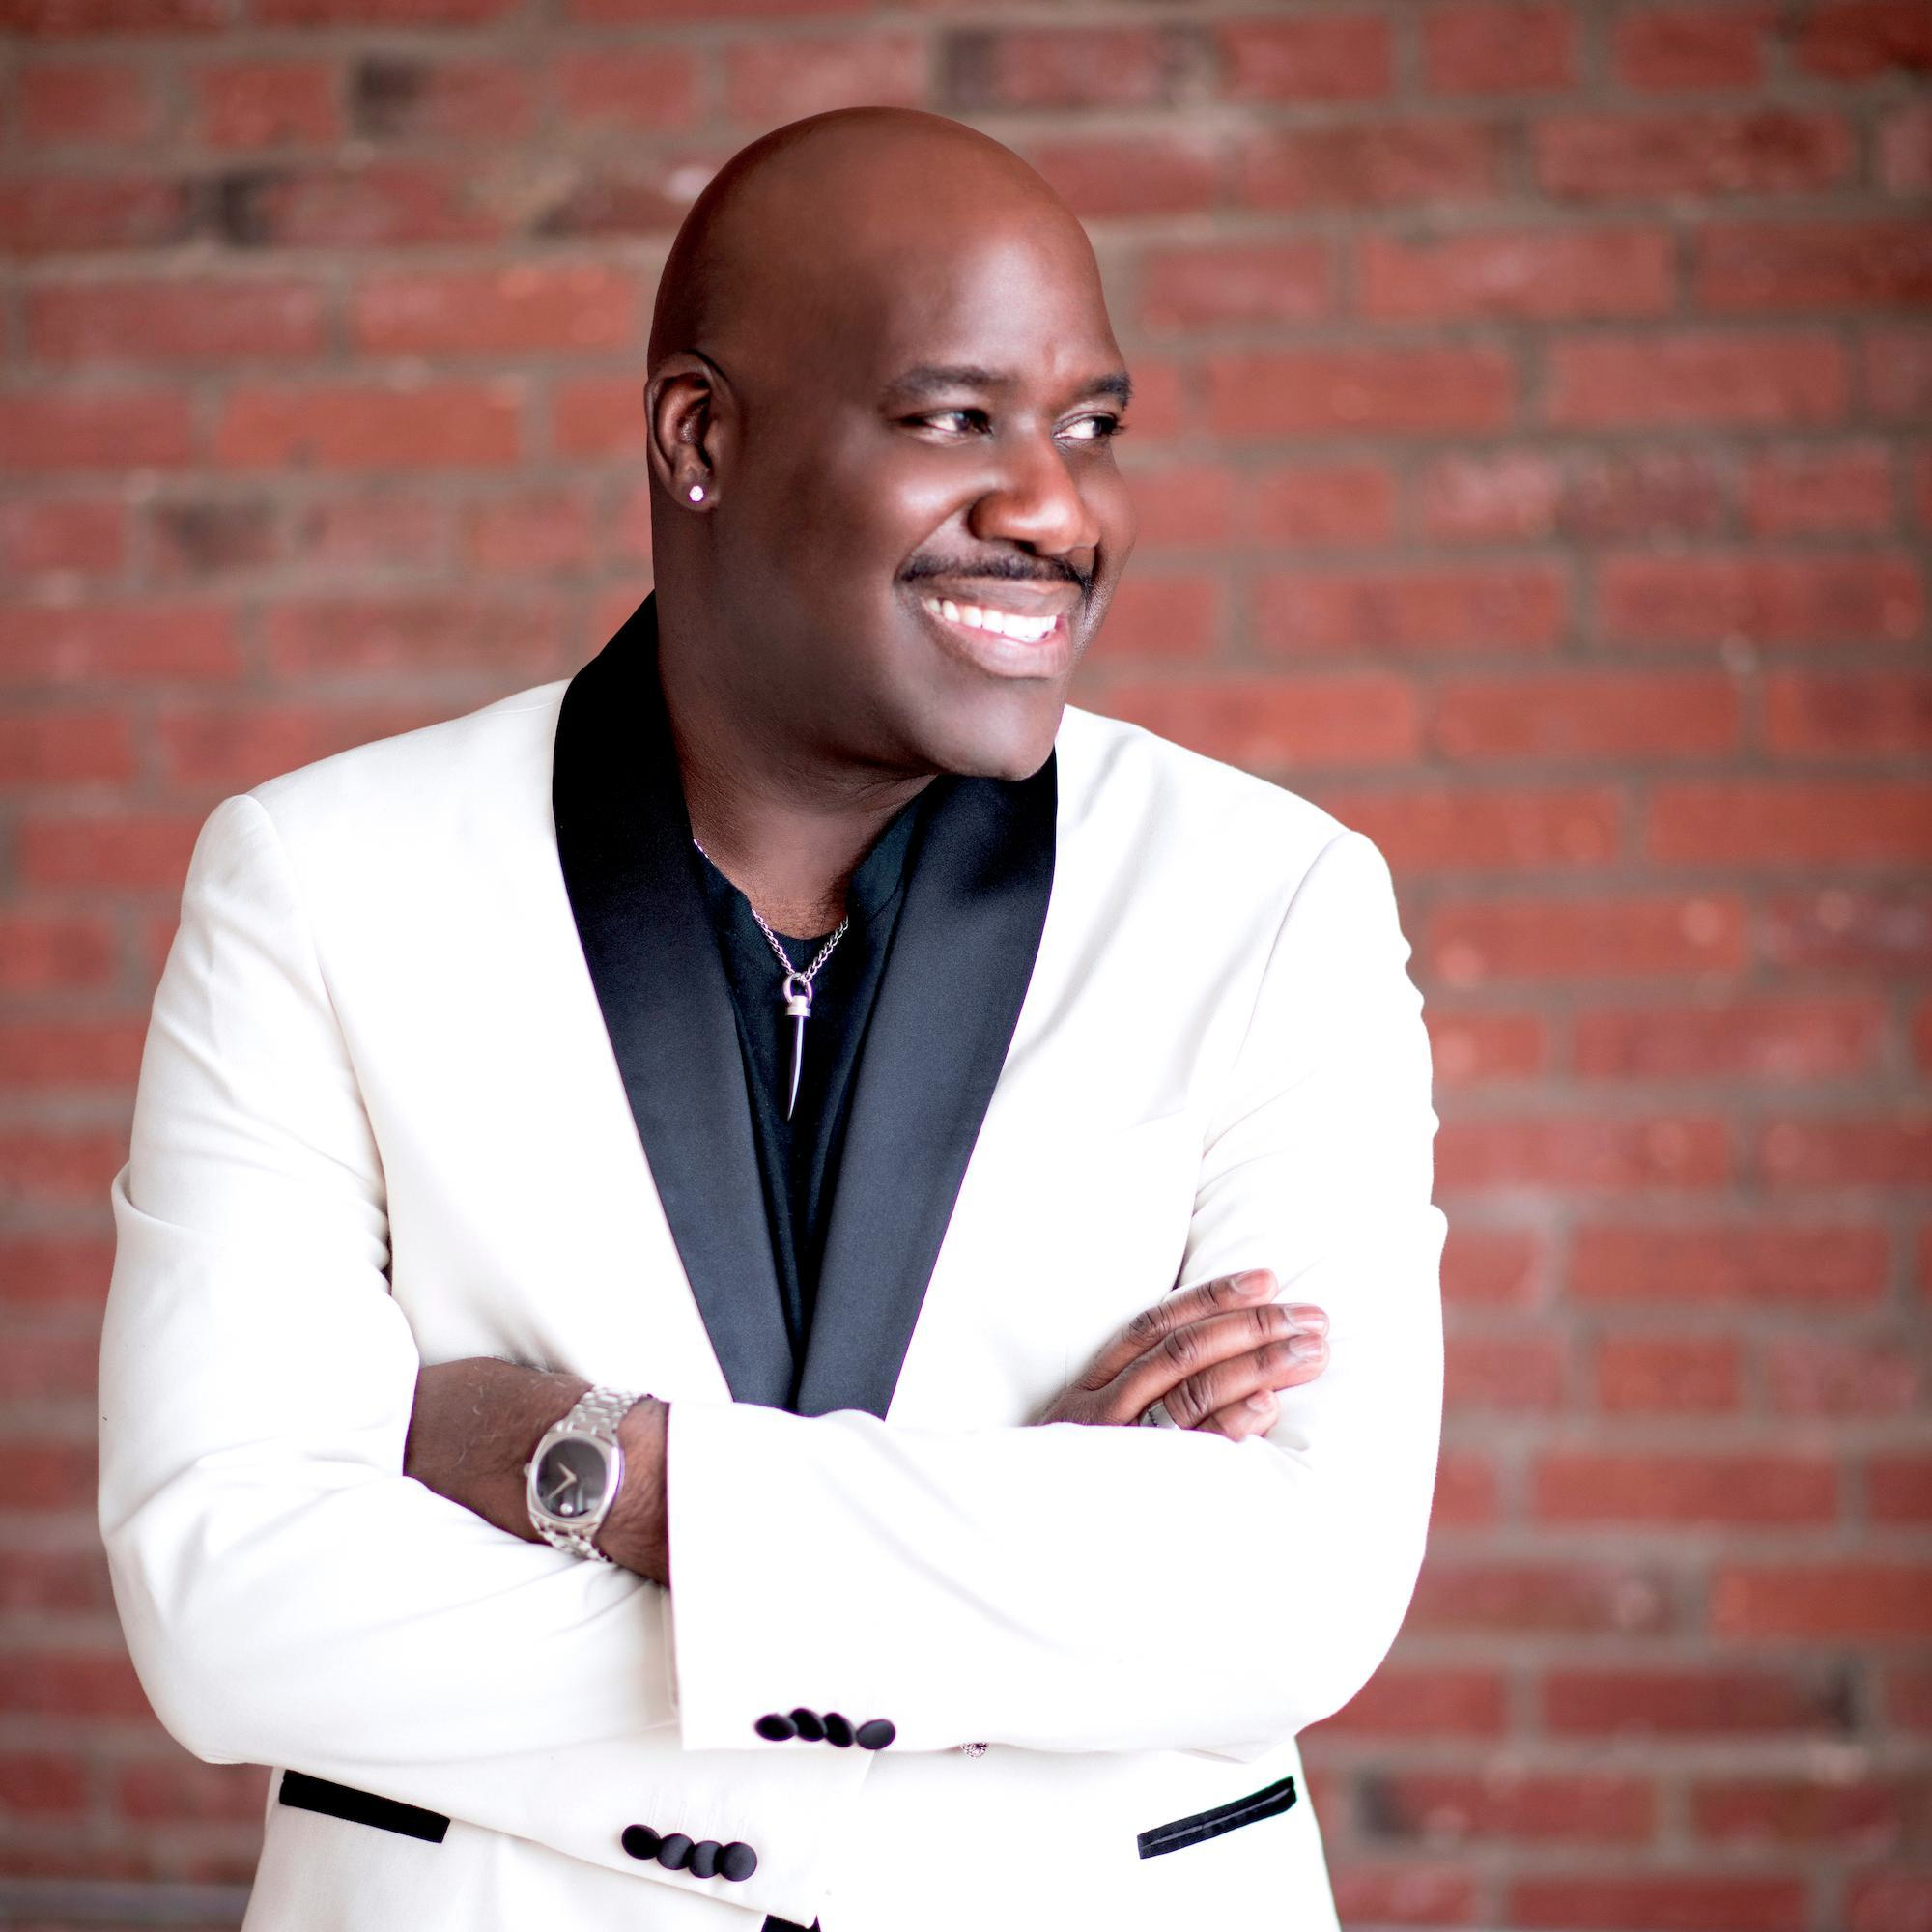 Will Downing, "The Prince of Sophisticated Soul," peforms at the Beacon Theatre on Valentine's Day, Sunday, February 14th at 8pm.